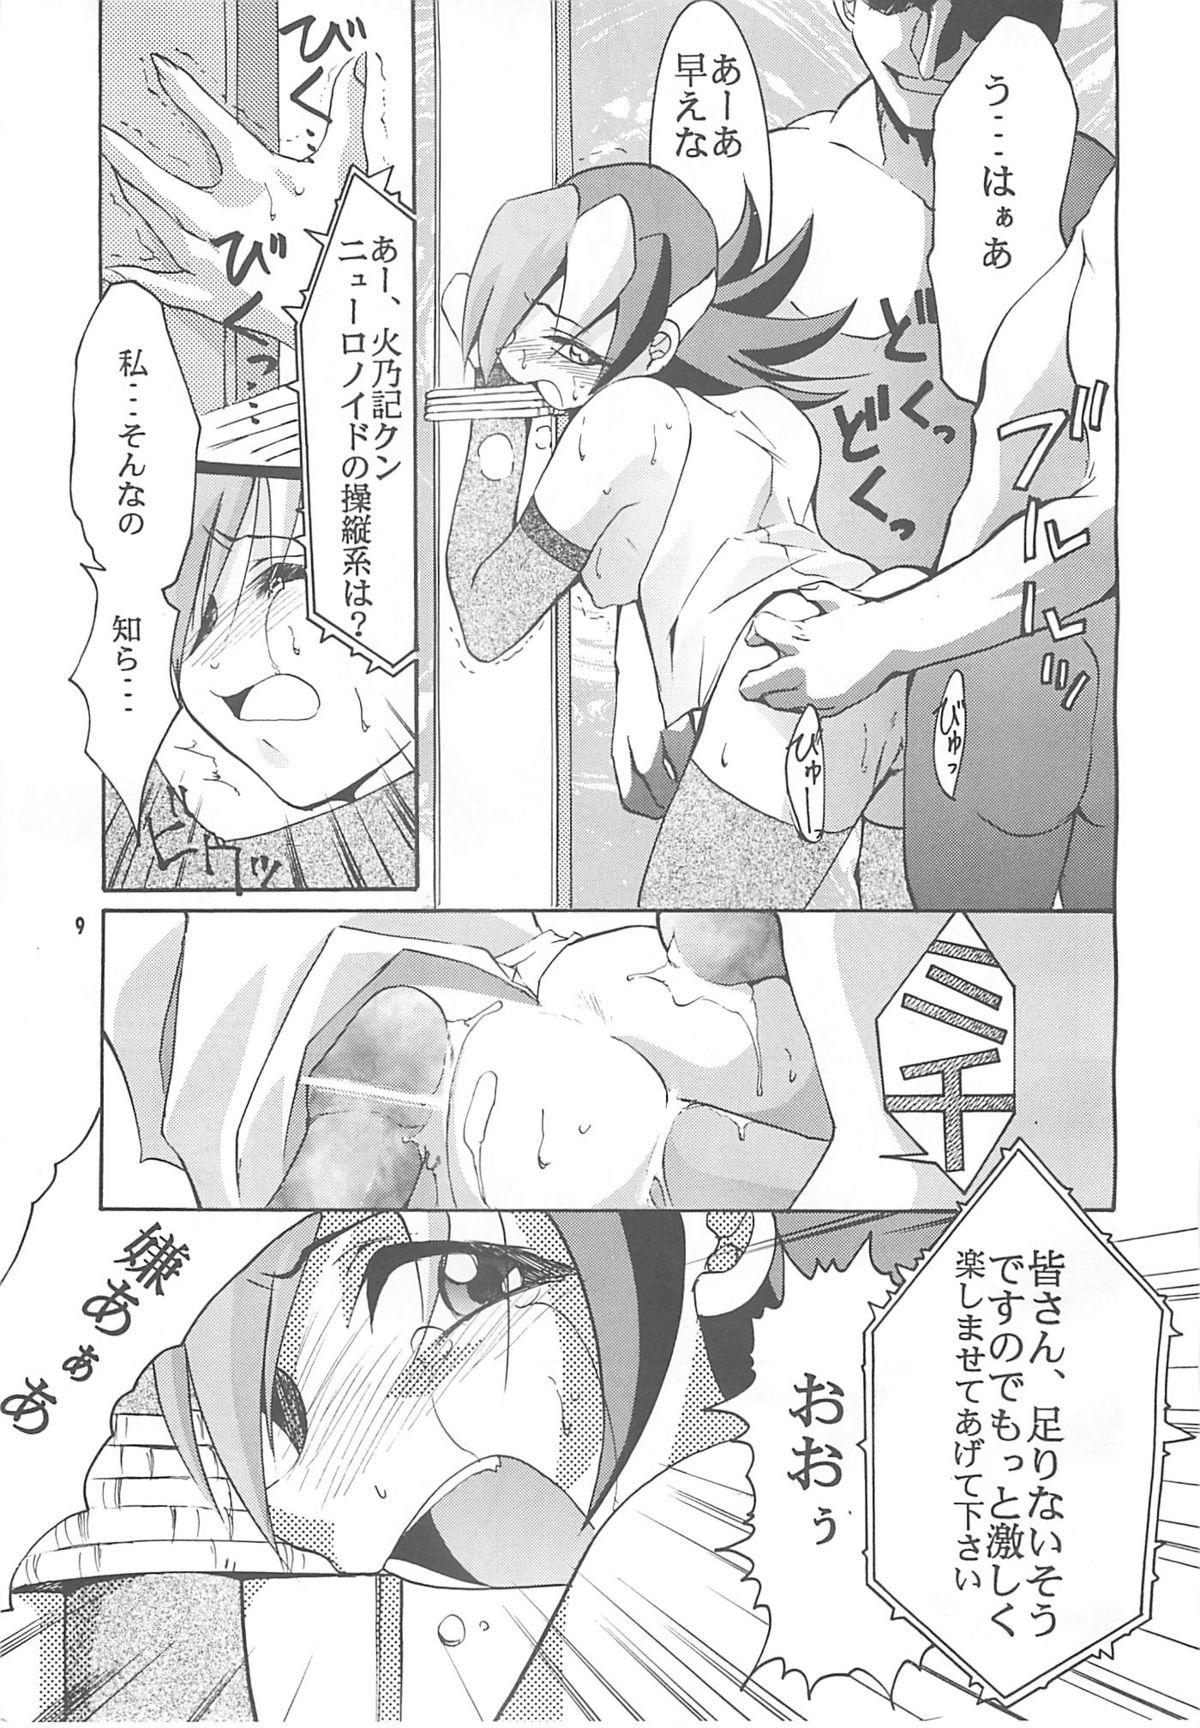 Calle TEN - Slayers Saber marionette Betterman Muscle - Page 8